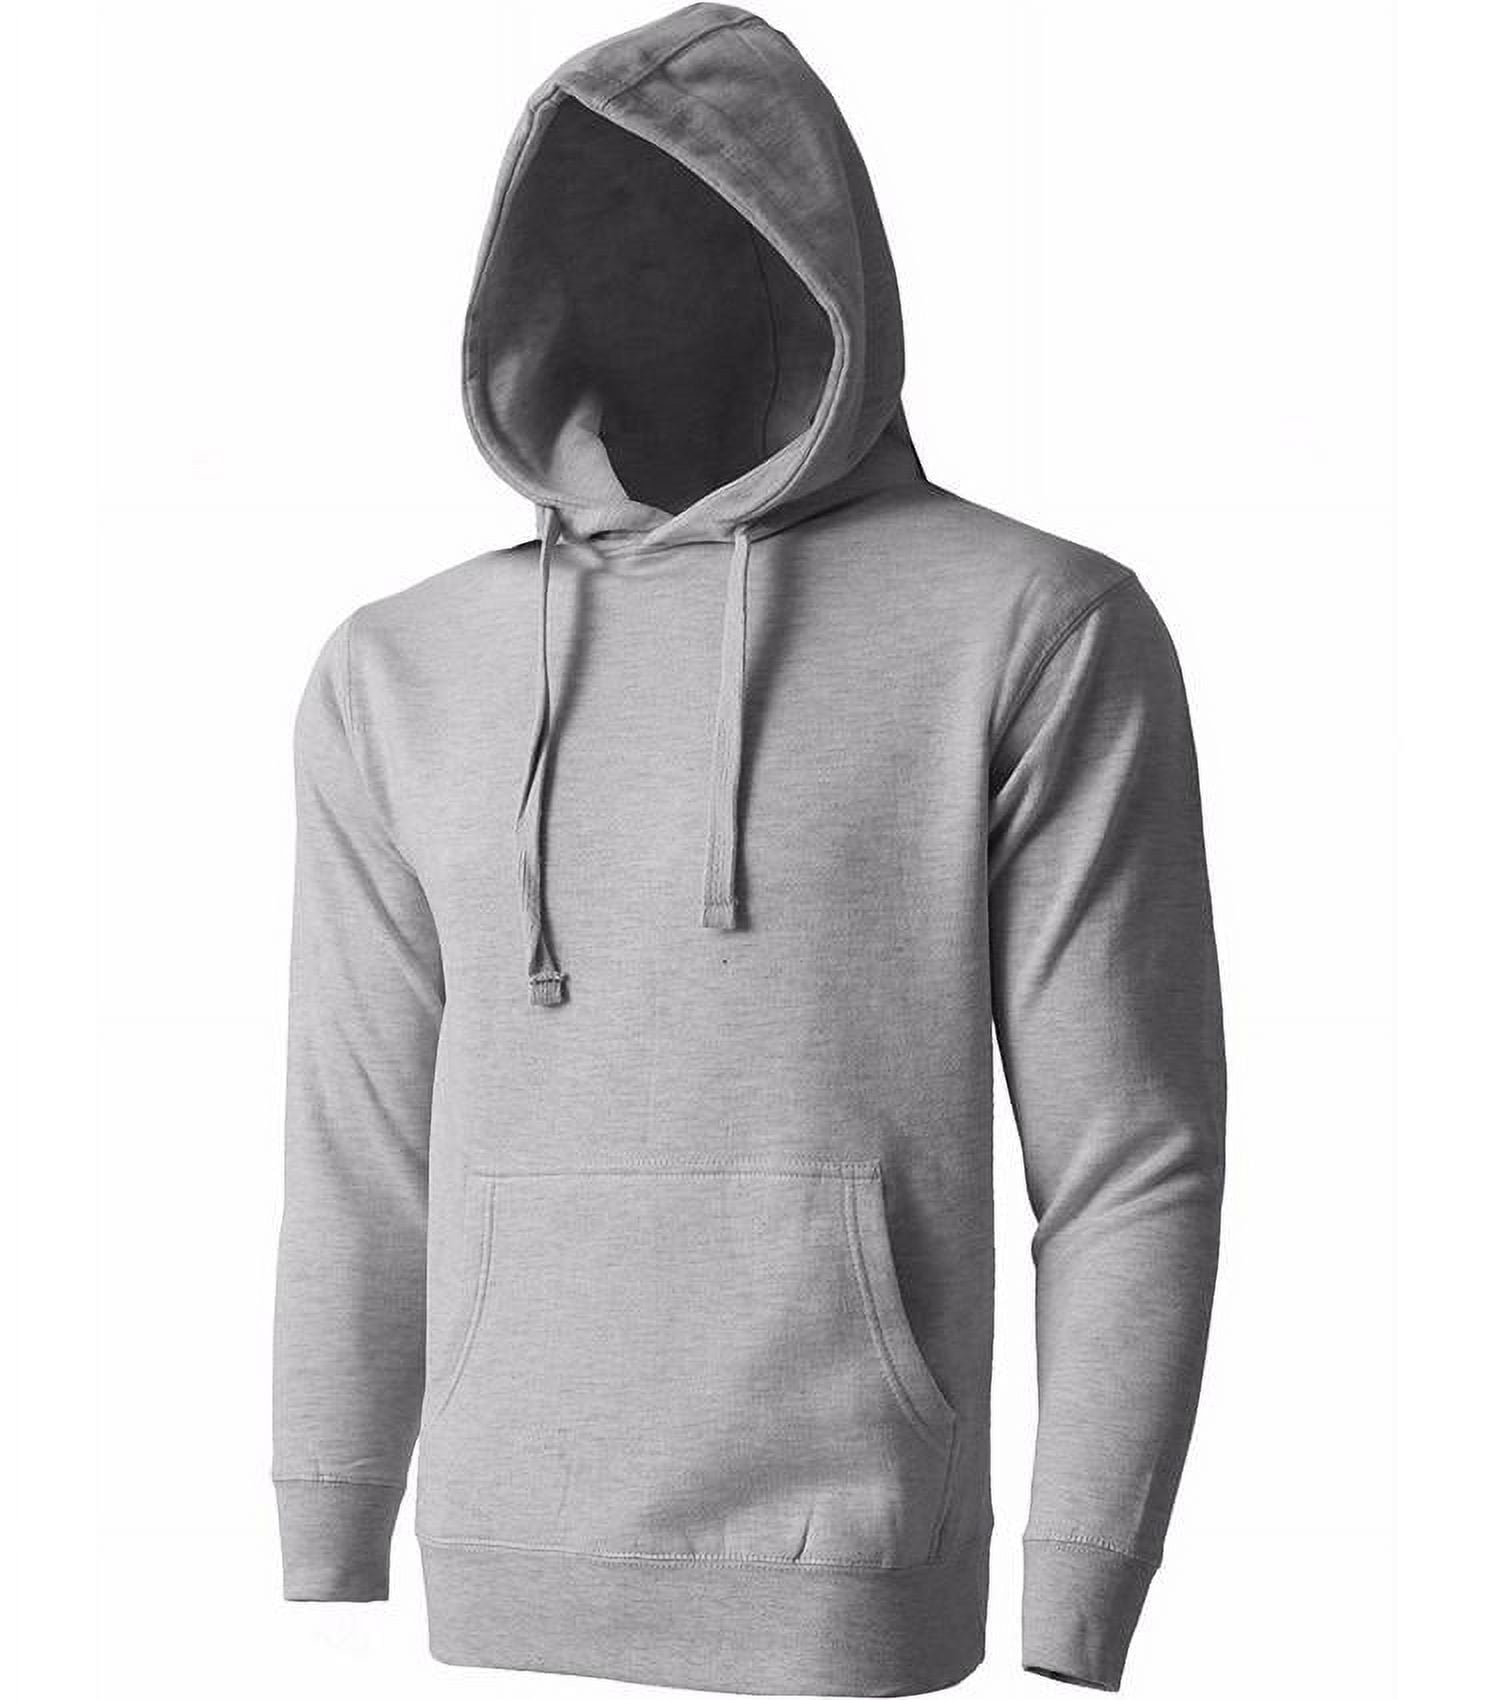 Men's Heavyweight Casual Pullover Hoodie Sweatshirt with Front Pocket  (Black, 4XL) 